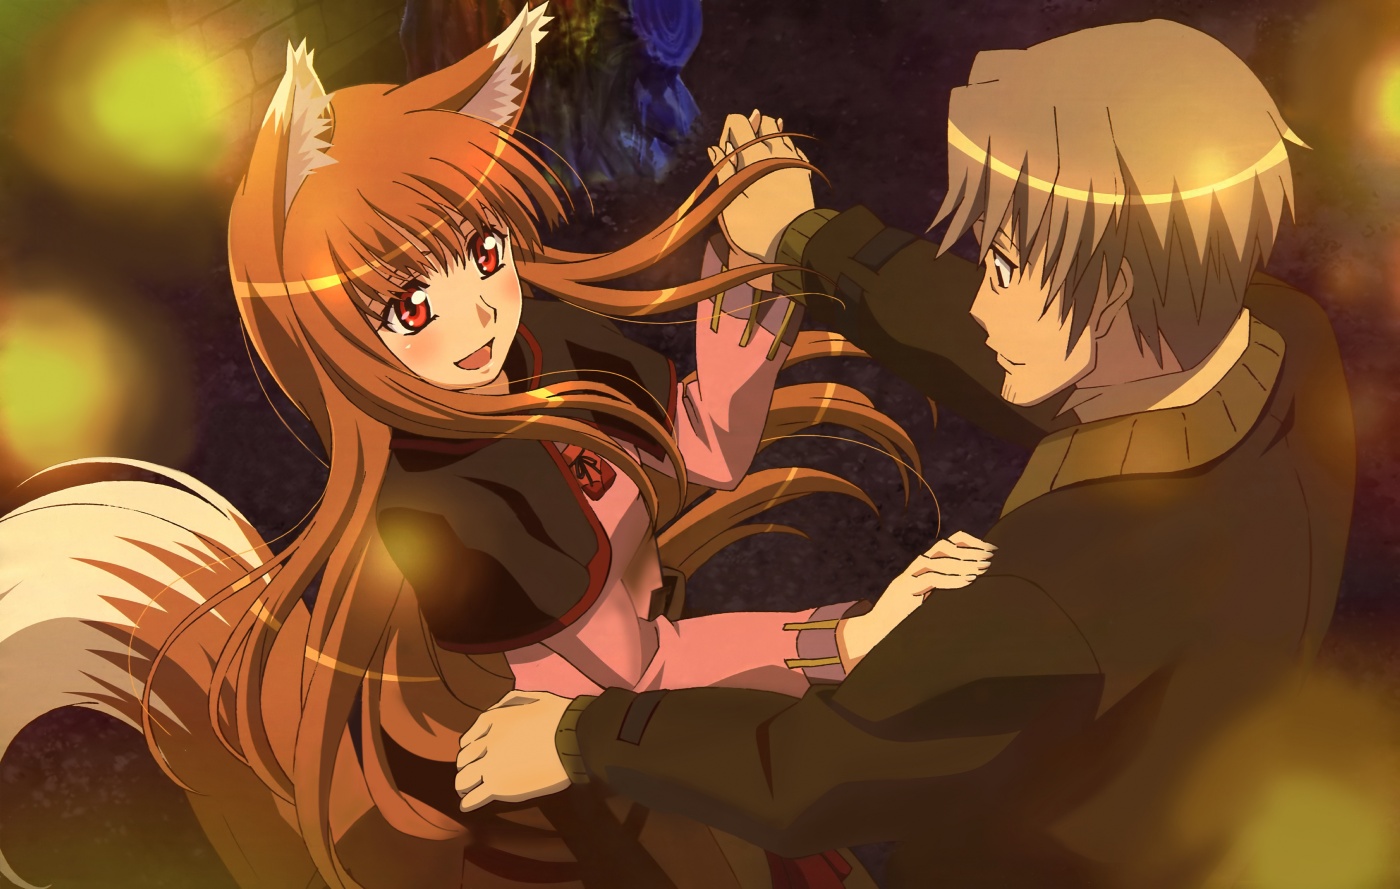 Spice and Wolf - Spice and Wolf 4.jpg